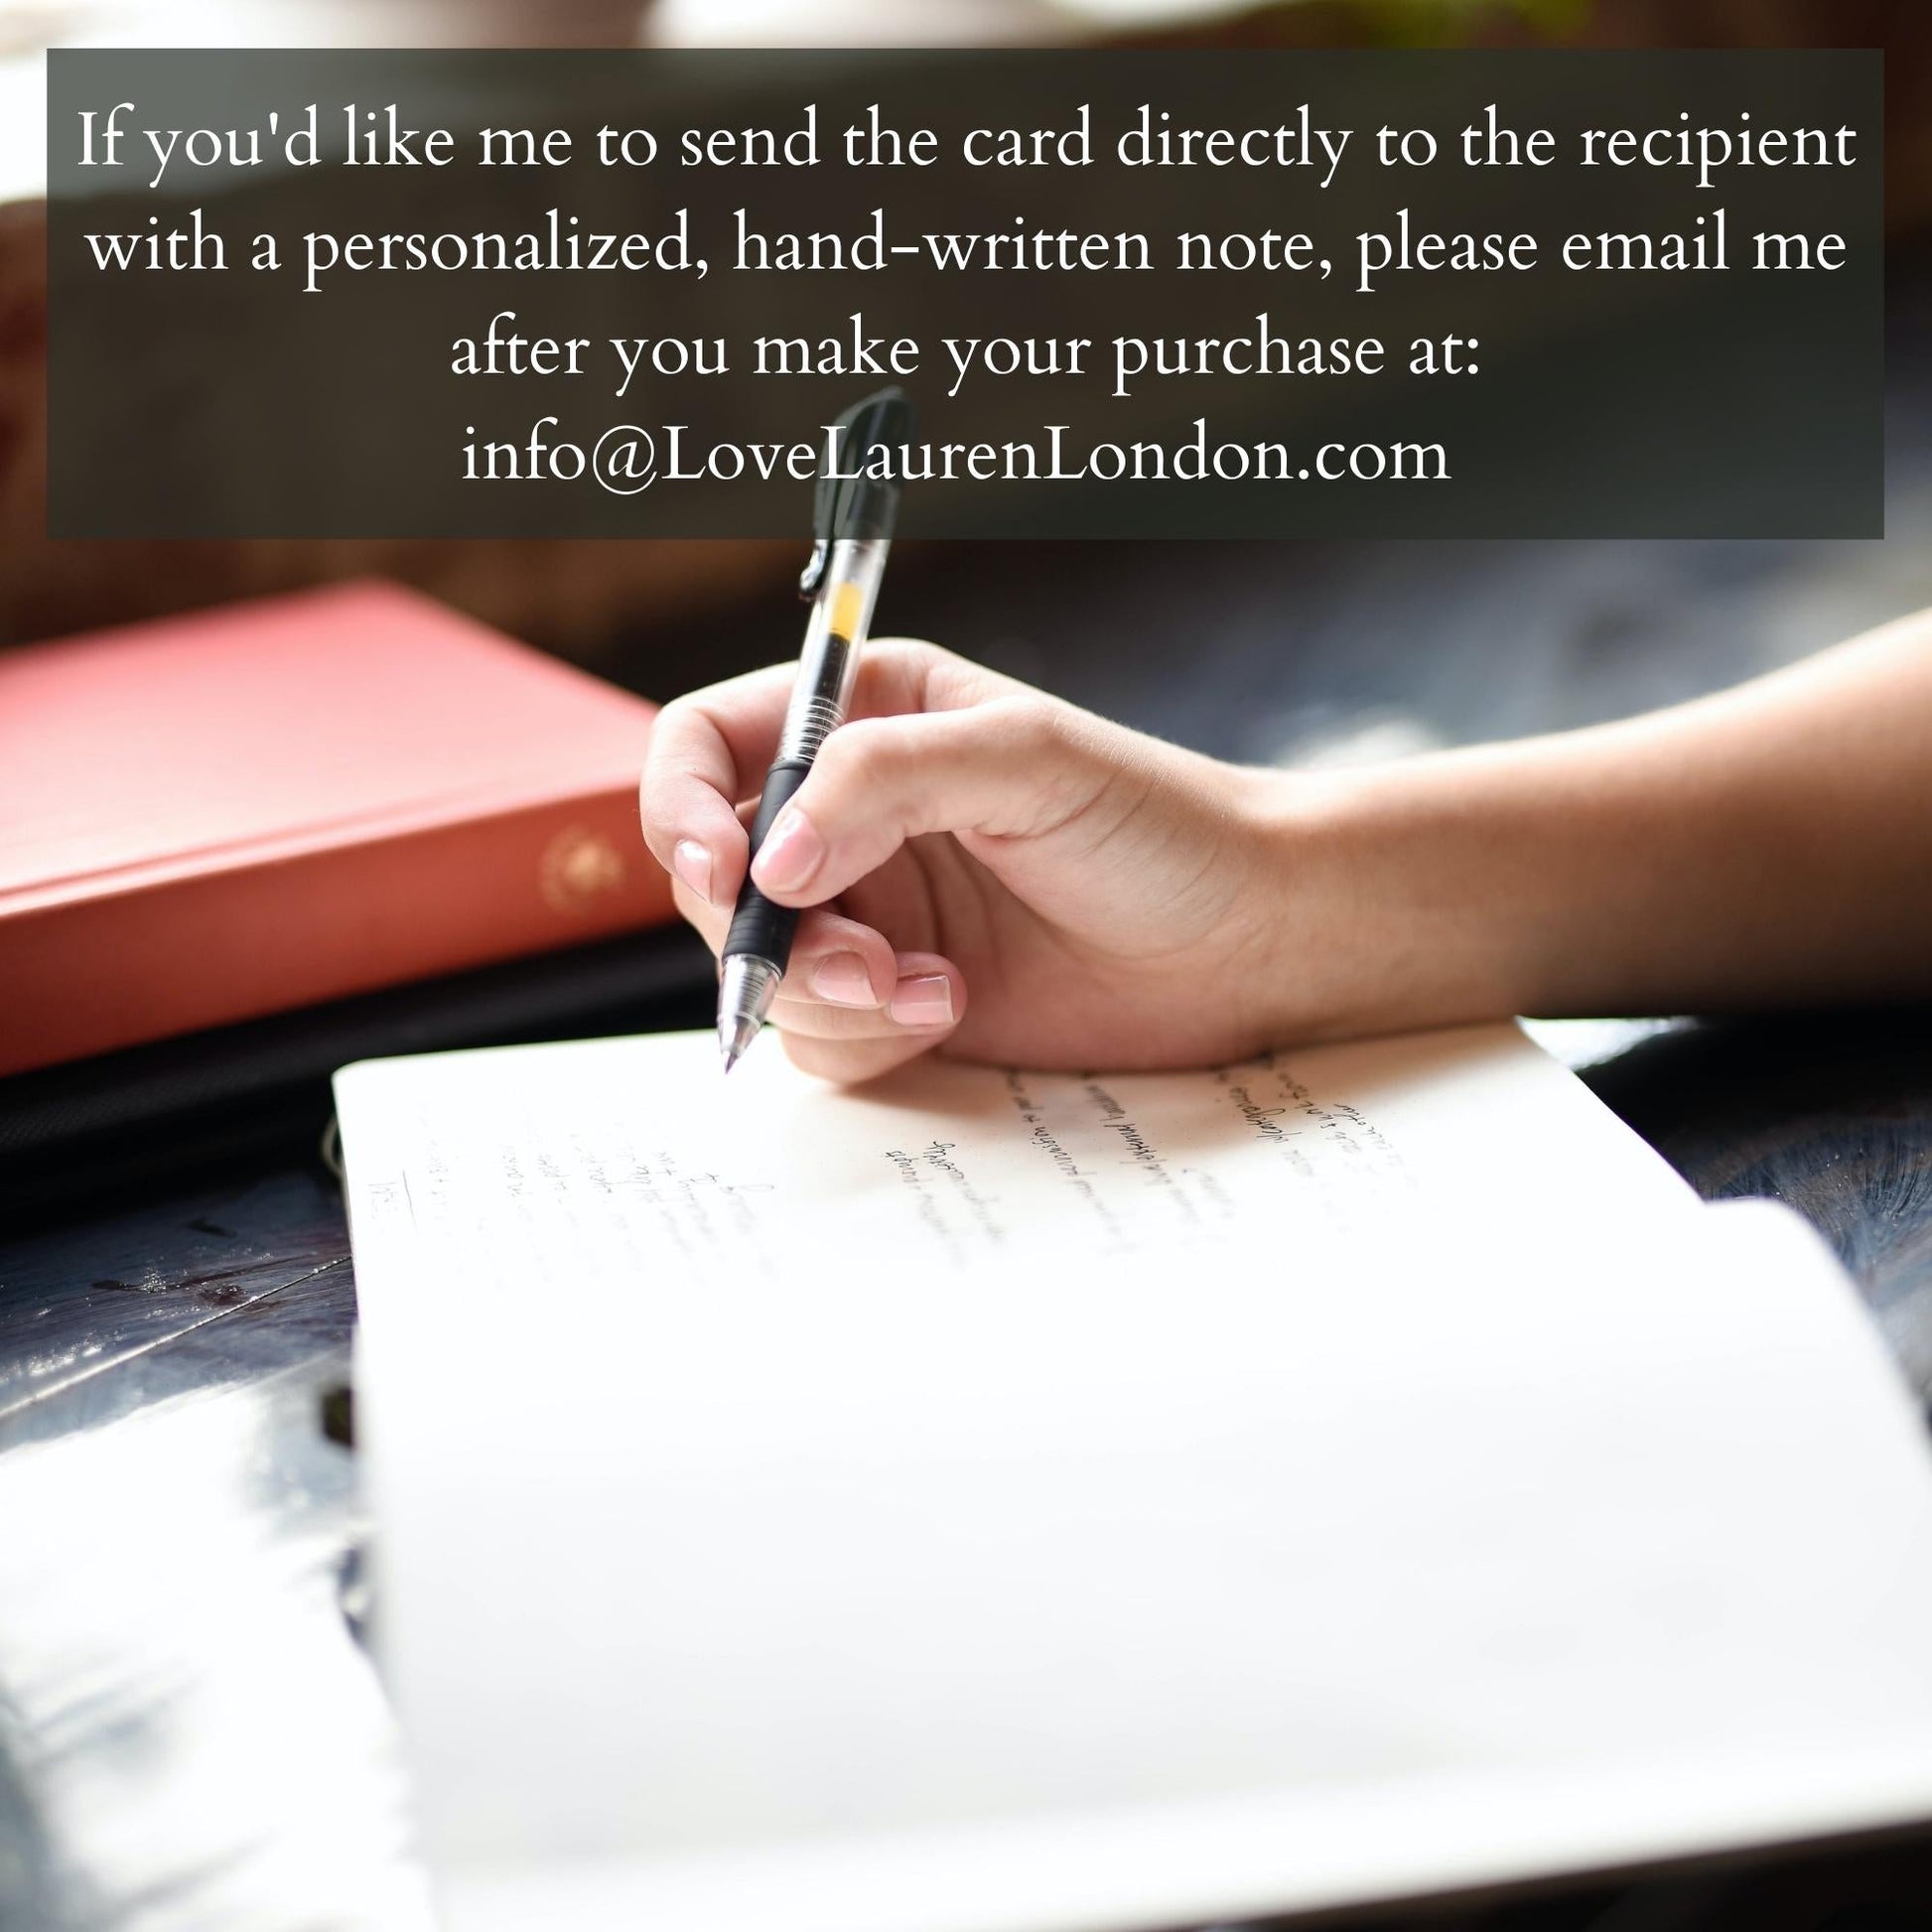 in a rush? I'll hand-write a note and mail it right to the recipient for free!